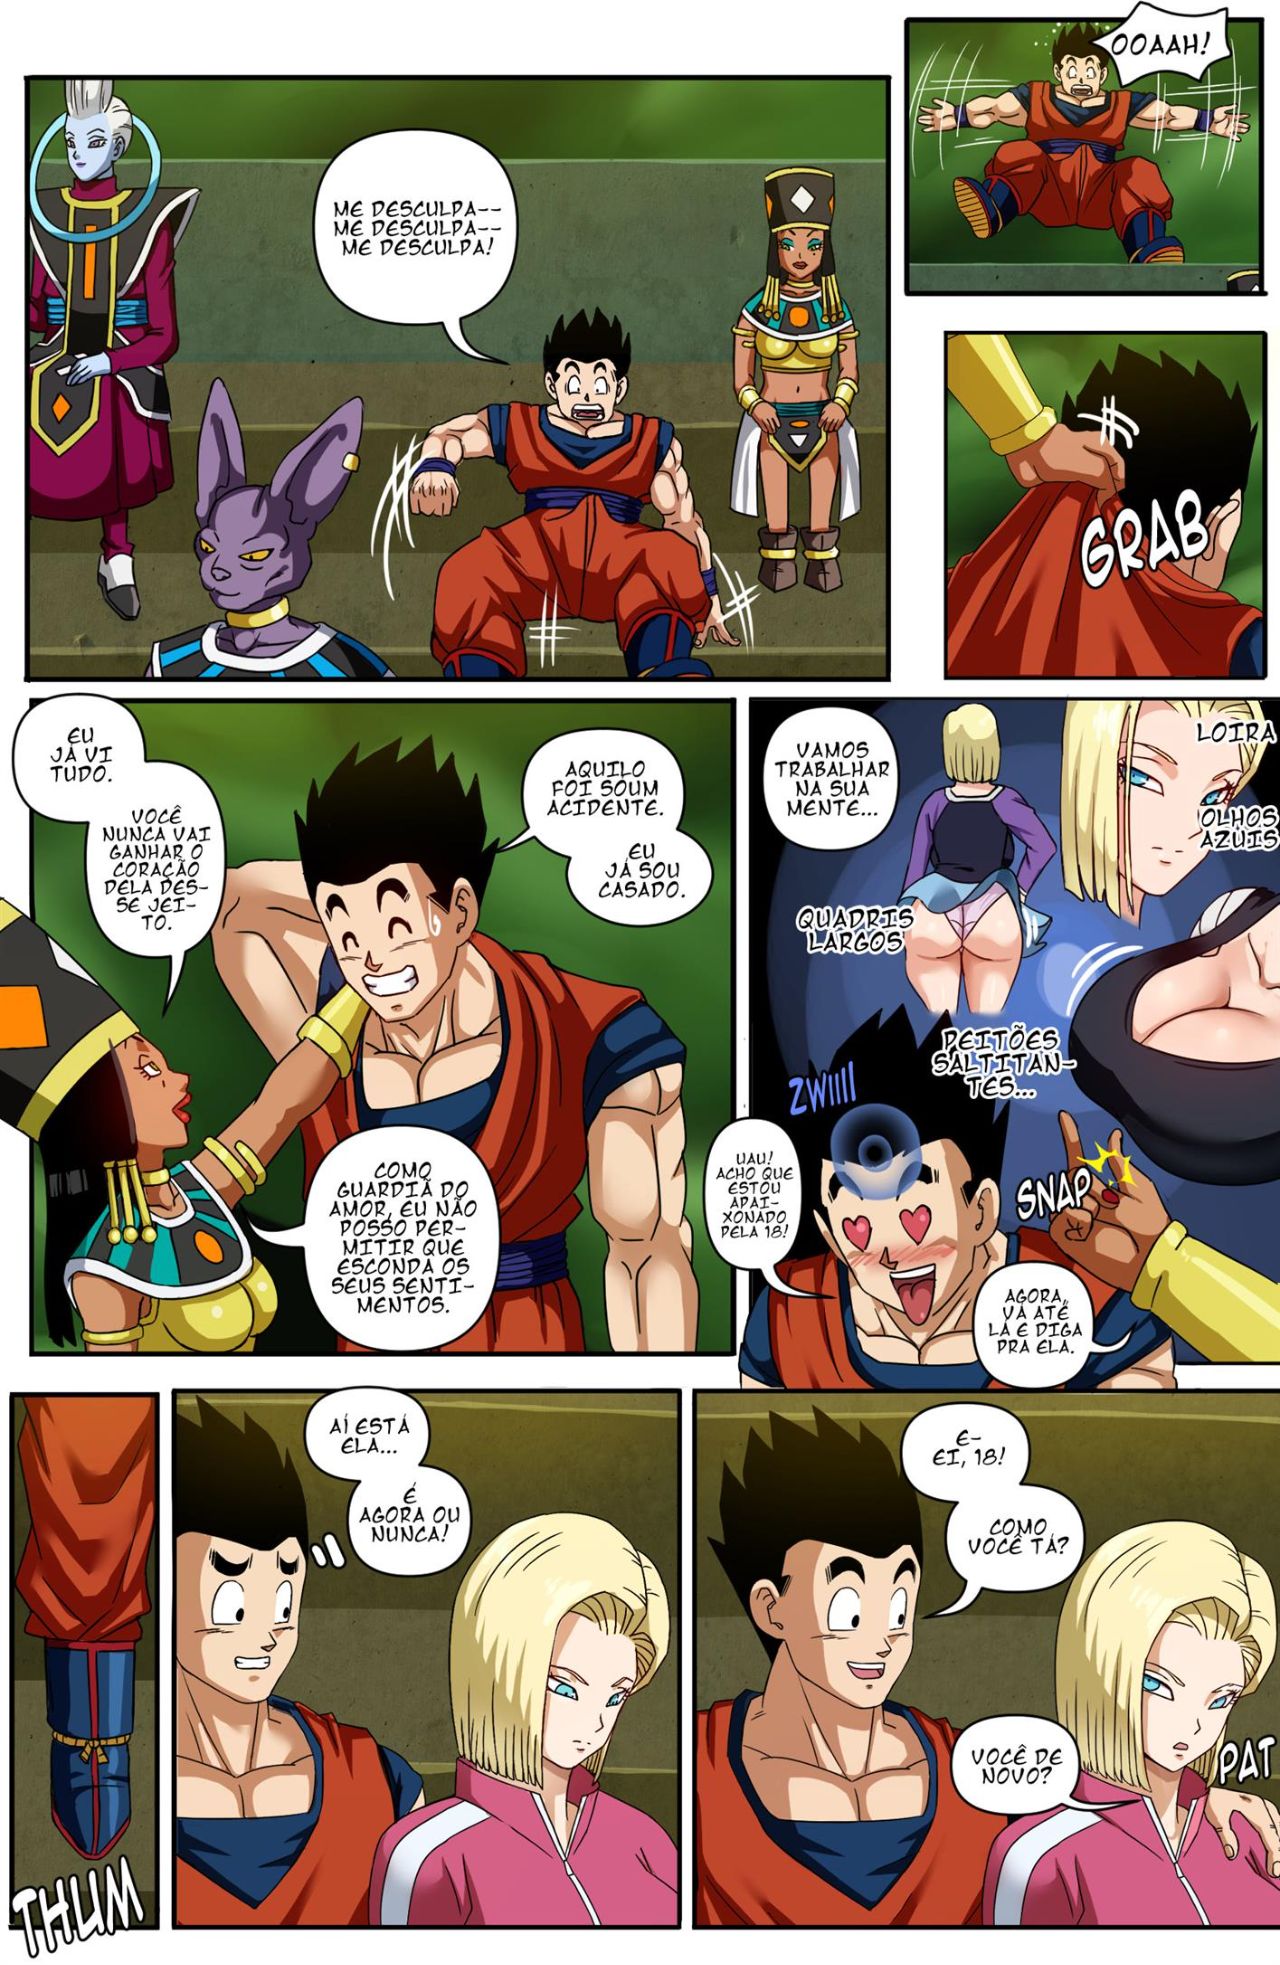 Android 18 And Gohan Part 2 Hentai pt-br 04